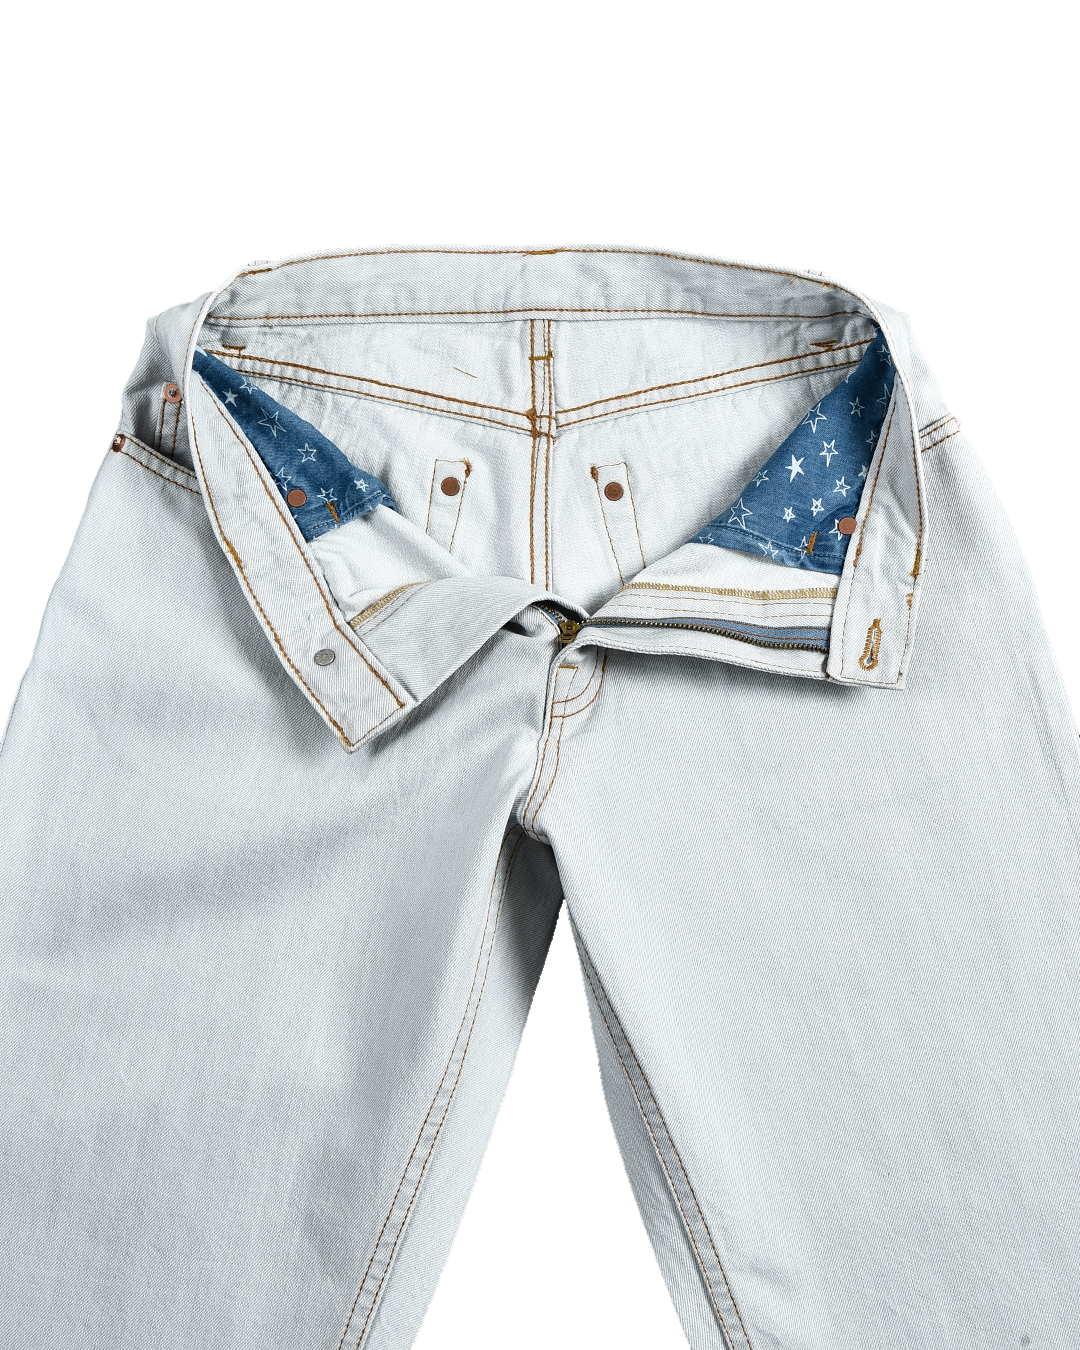 Front open view of mens jeans by Luxire in fade washed indigo with turquoise tint 2